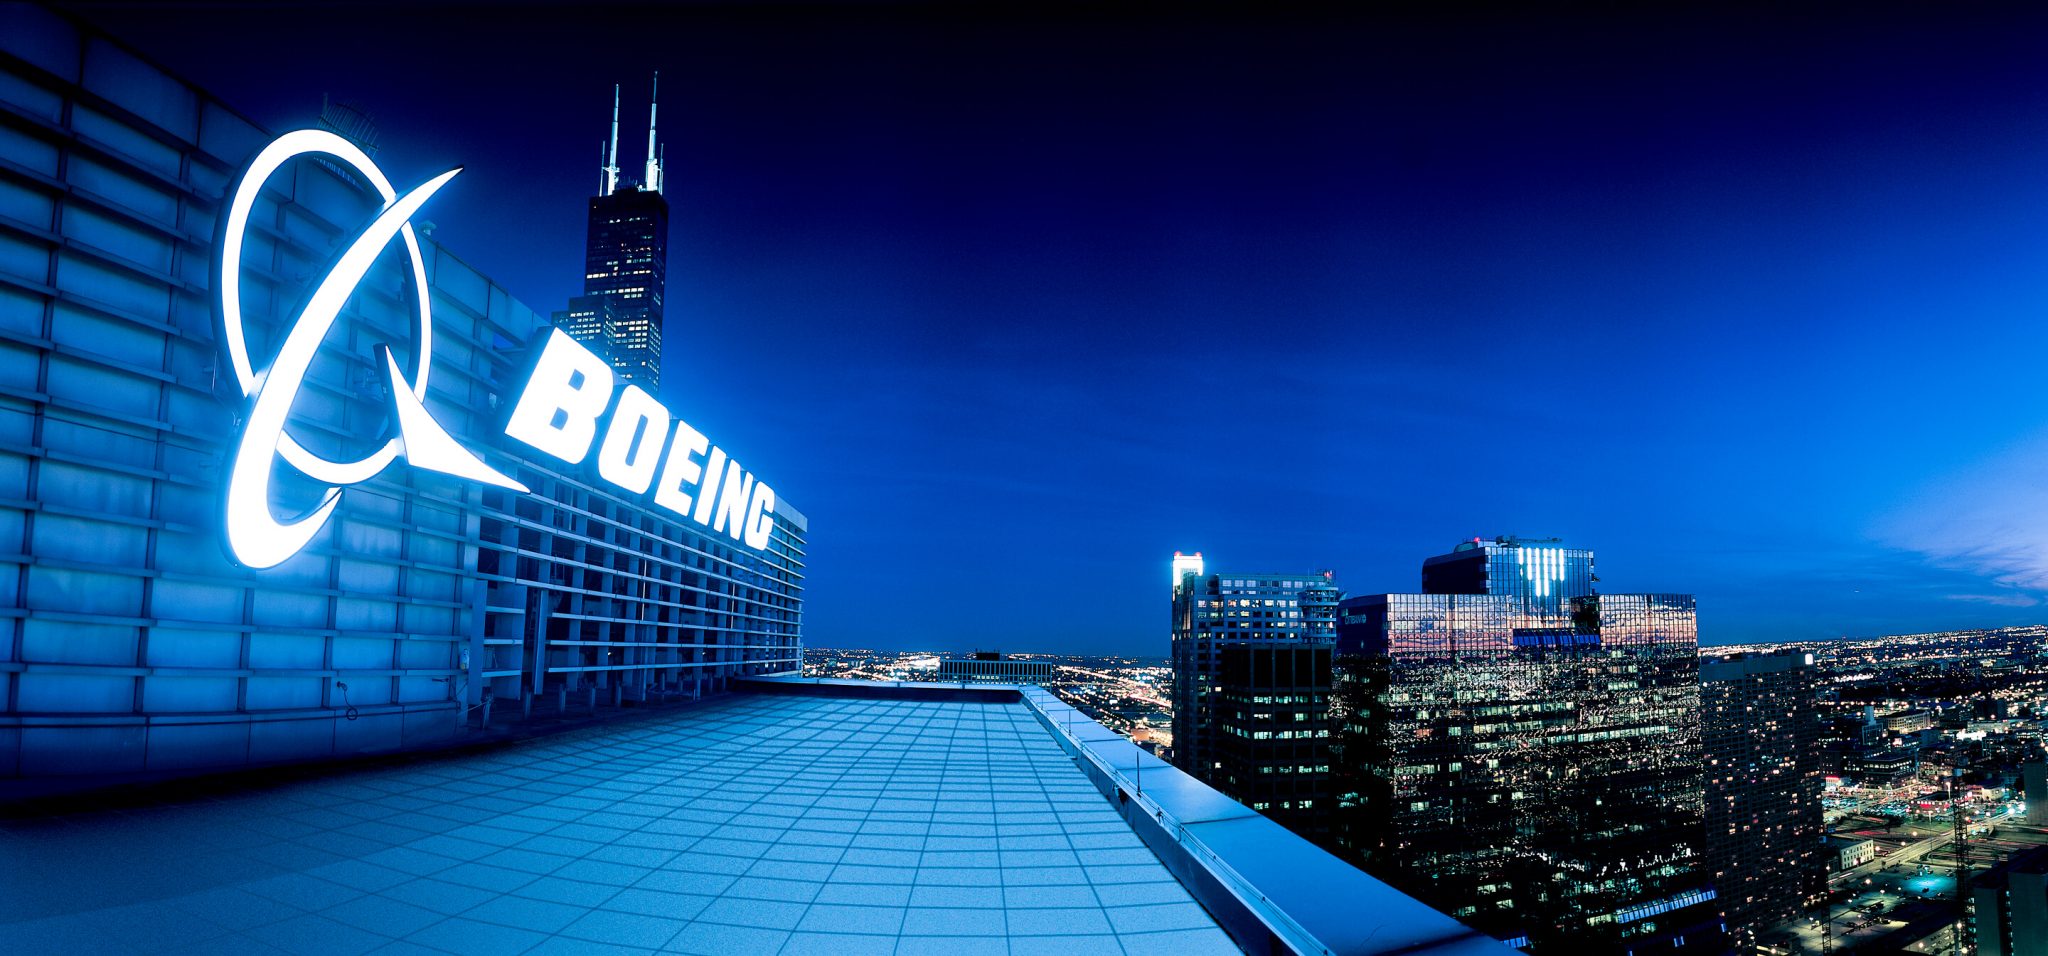 Boeing’s head of 737 division set to retire